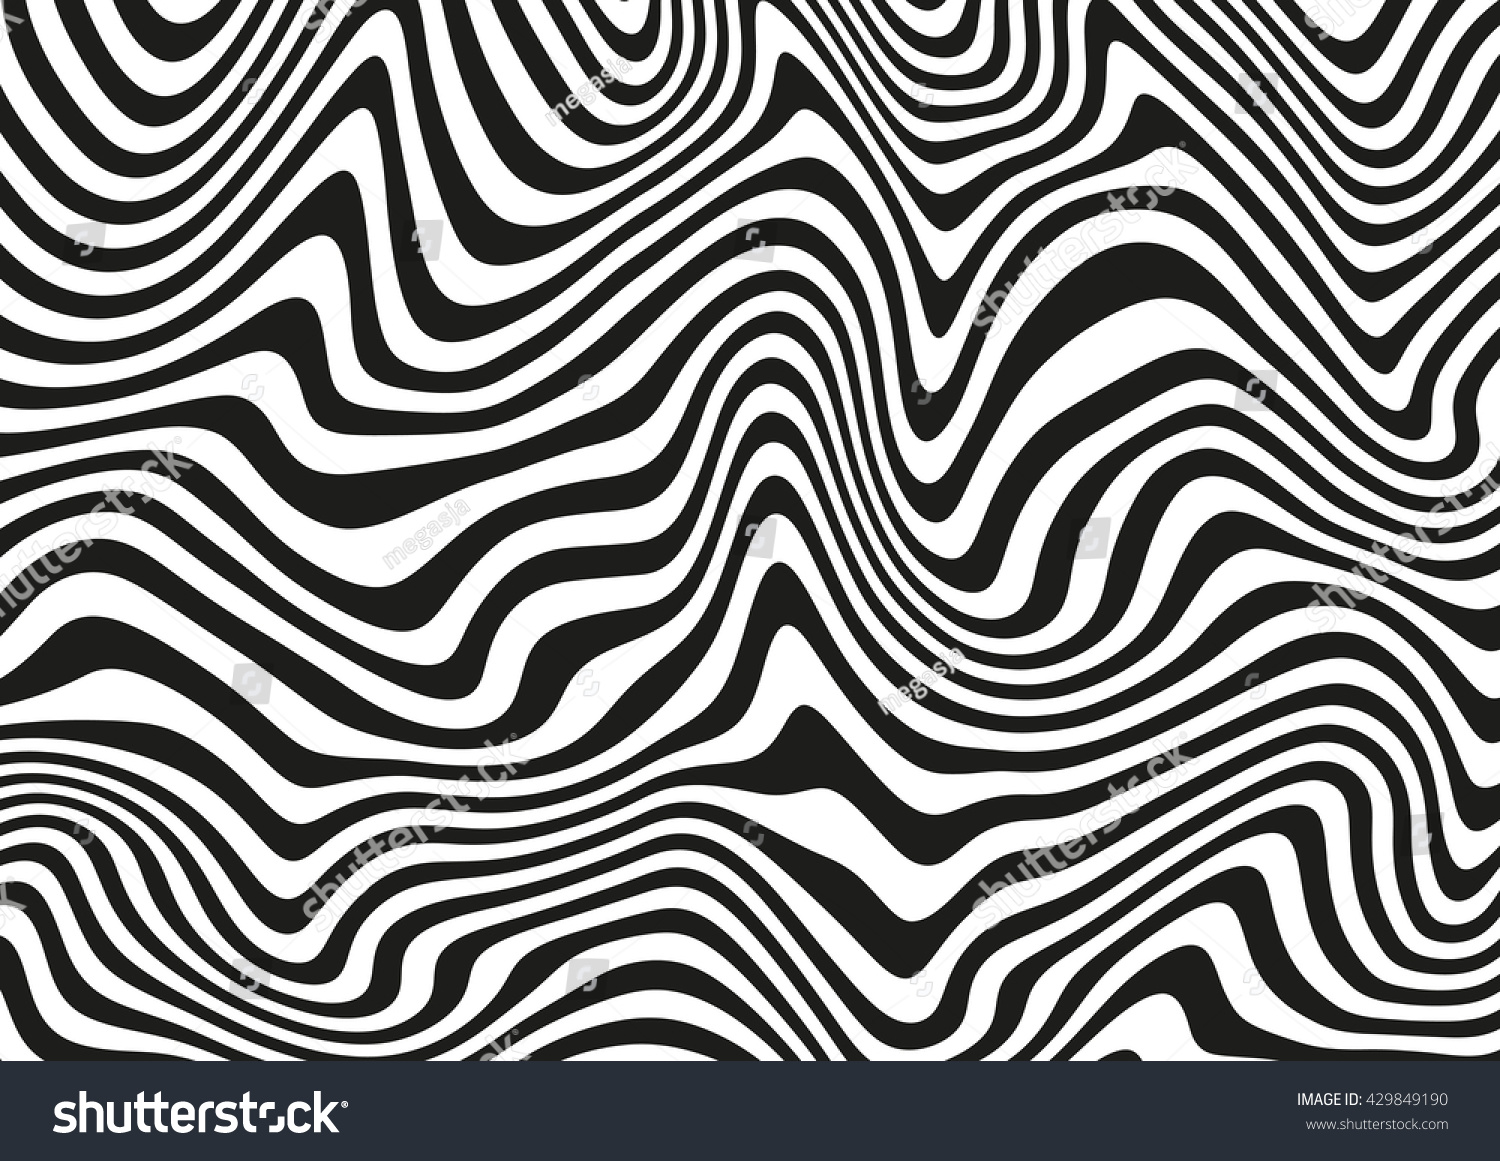 Black White Abstract Wavy Background Stock Vector (Royalty Free) 429849190